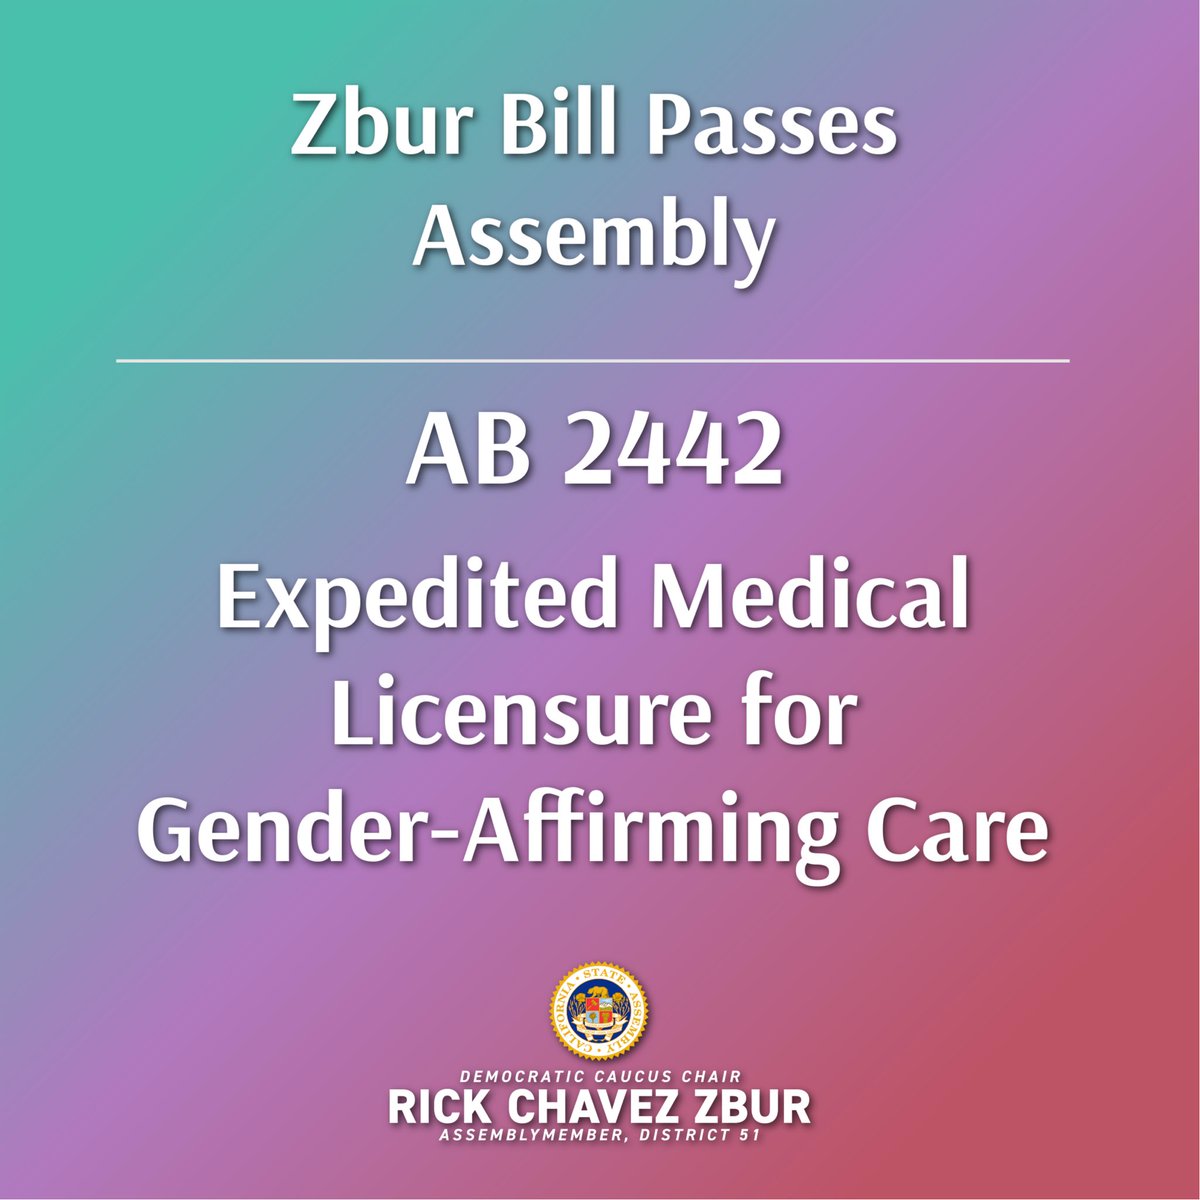 Proud to announce that #AB2442, my bill to expedite licensing of gender-affirming care providers, passed the Assembly! With bans of health care for trans ppl sweeping the country, CA must be prepared to provide this vital care. TY sponsors @eqca and @PPActionCA!